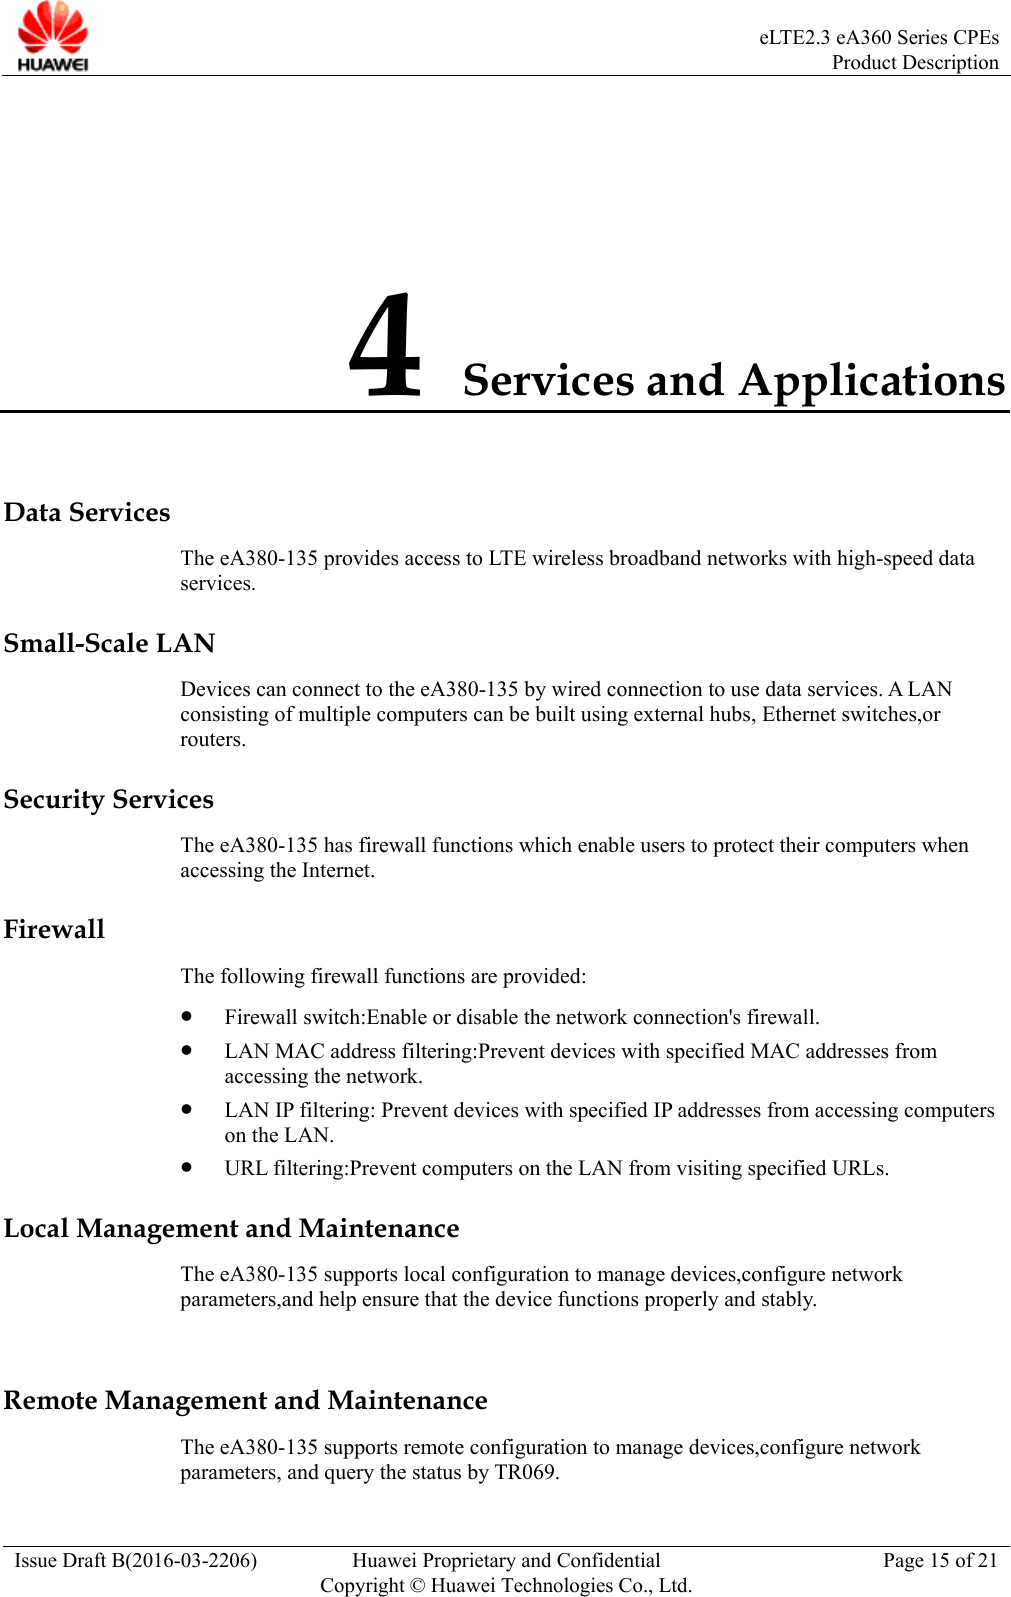  eLTE2.3 eA360 Series CPEsProduct Description Issue Draft B(2016-03-2206)  Huawei Proprietary and Confidential Copyright © Huawei Technologies Co., Ltd.Page 15 of 21 4 Services and Applications Data Services The eA380-135 provides access to LTE wireless broadband networks with high-speed data services.  Small-Scale LAN Devices can connect to the eA380-135 by wired connection to use data services. A LAN consisting of multiple computers can be built using external hubs, Ethernet switches,or routers. Security Services The eA380-135 has firewall functions which enable users to protect their computers when accessing the Internet. Firewall The following firewall functions are provided:    Firewall switch:Enable or disable the network connection&apos;s firewall.  LAN MAC address filtering:Prevent devices with specified MAC addresses from accessing the network.  LAN IP filtering: Prevent devices with specified IP addresses from accessing computers on the LAN.  URL filtering:Prevent computers on the LAN from visiting specified URLs. Local Management and Maintenance The eA380-135 supports local configuration to manage devices,configure network parameters,and help ensure that the device functions properly and stably.  Remote Management and Maintenance The eA380-135 supports remote configuration to manage devices,configure network parameters, and query the status by TR069. 